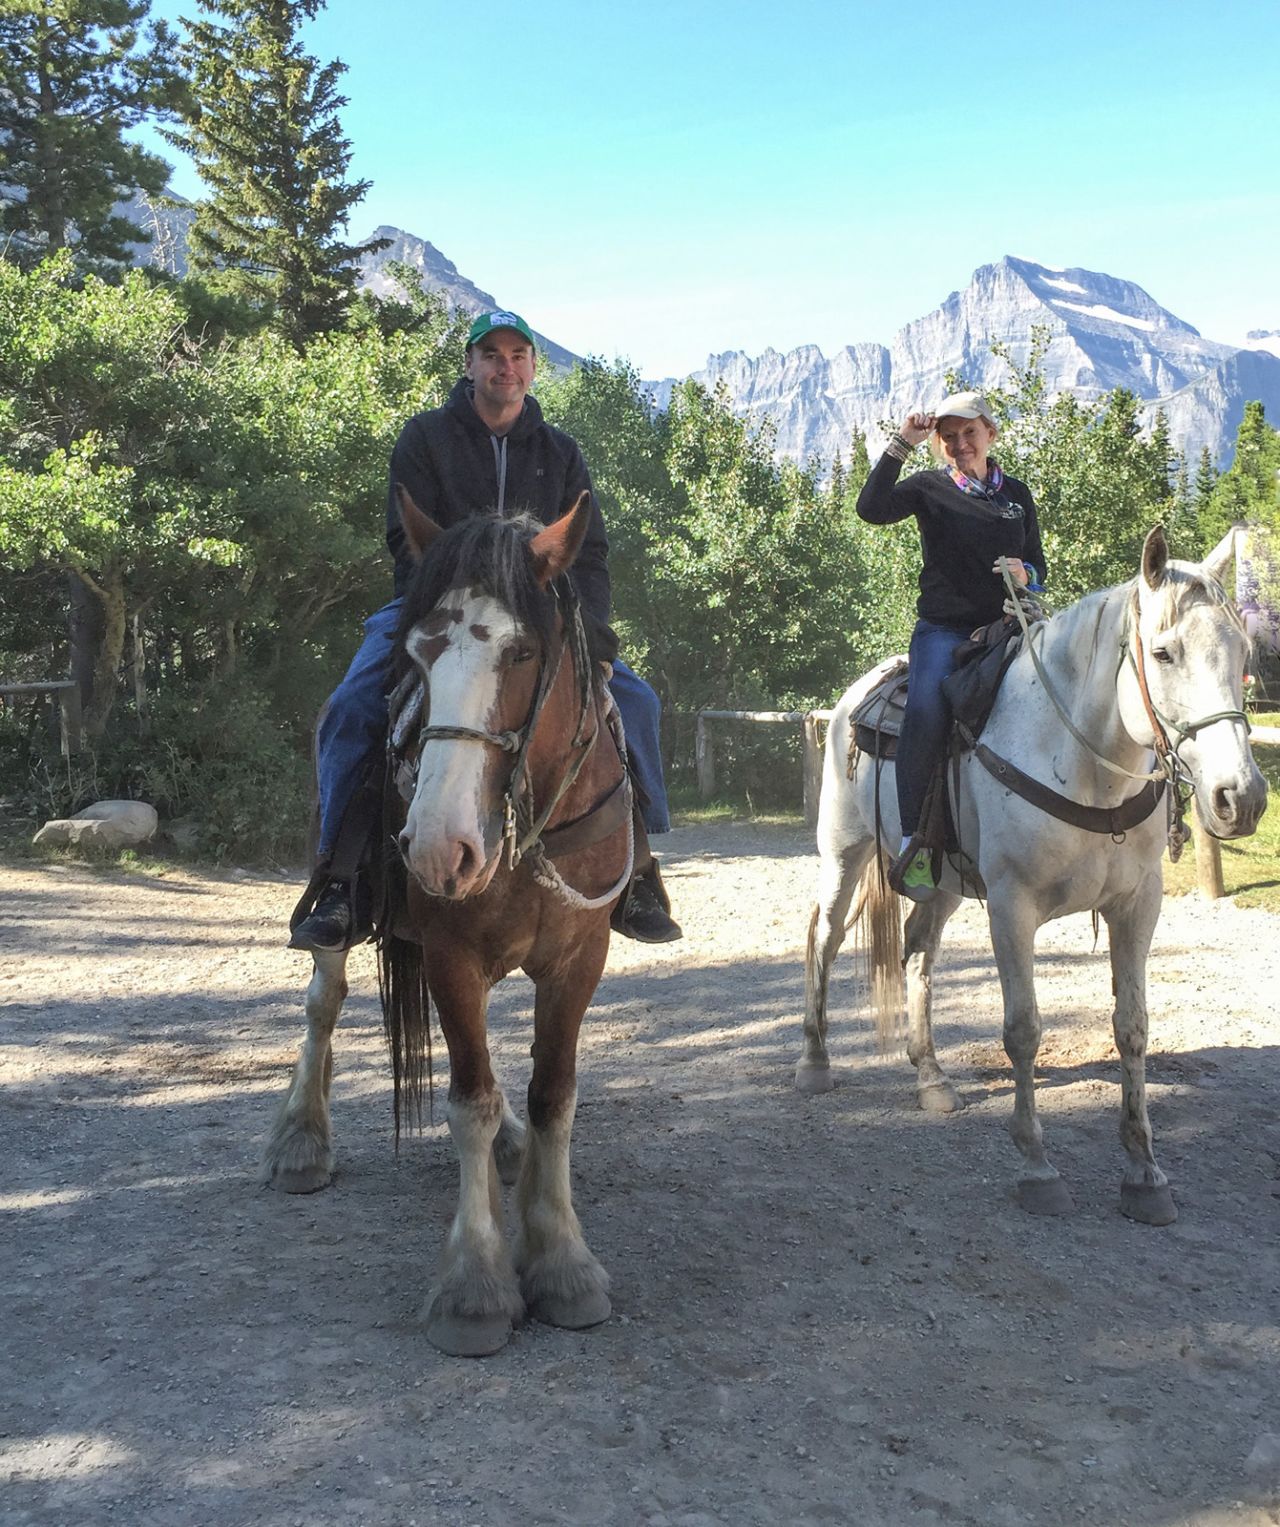 Beyond the first-time hiking trip, it was also the first time McGraw was able to go horseback riding. He always had to say "no" to the activity because there was a 250-pound weight limit.